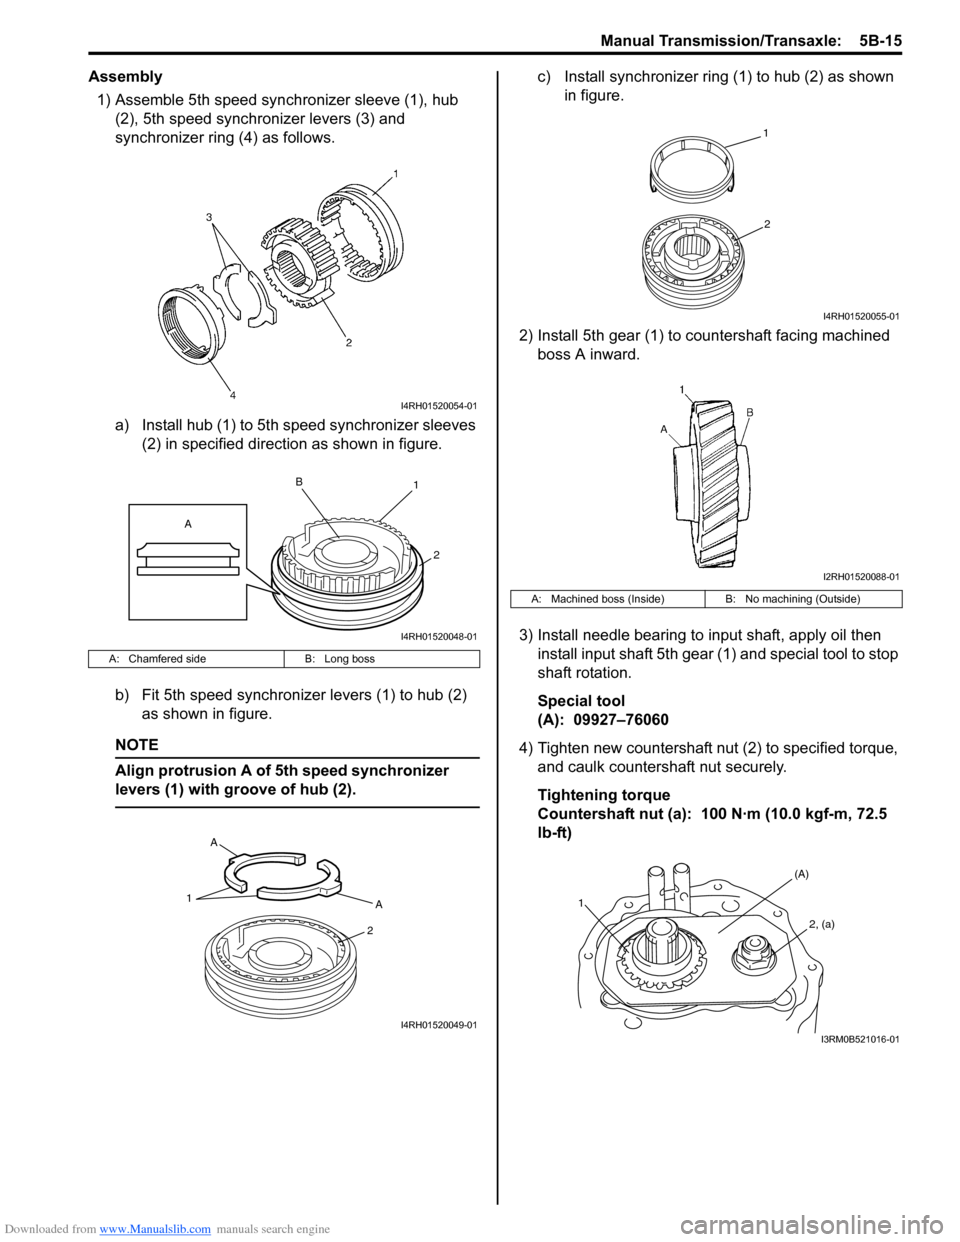 SUZUKI SWIFT 2007 2.G Service User Guide Downloaded from www.Manualslib.com manuals search engine Manual Transmission/Transaxle:  5B-15
Assembly1) Assemble 5th speed synchronizer sleeve (1), hub  (2), 5th speed synchronizer levers (3) and 
s